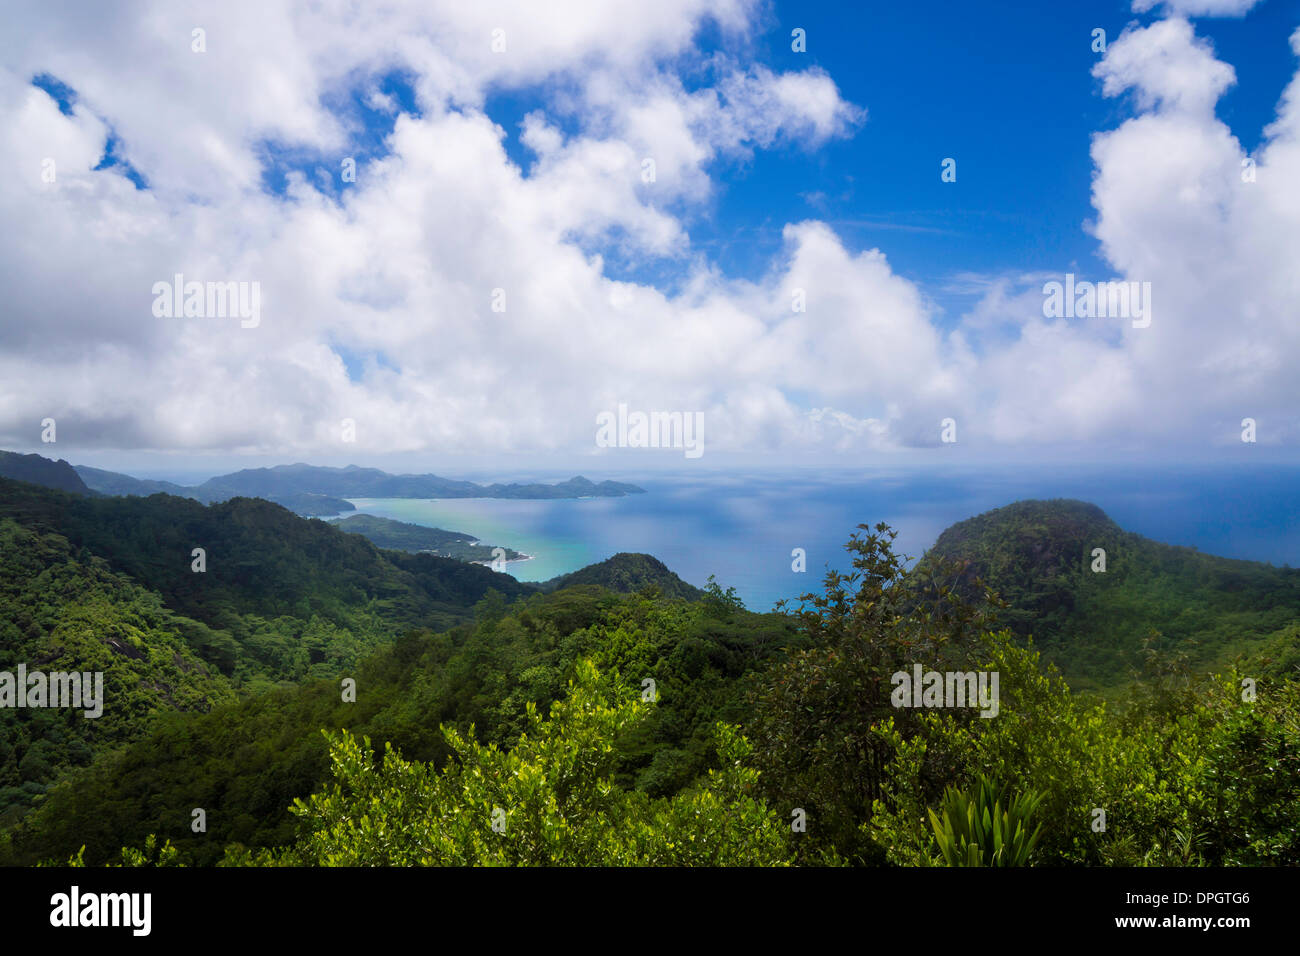 Viewpoint, Mission Lodge, Morne Blanc, Mahe, Seychelles, Indian Ocean, Africa - December 2013 Stock Photo